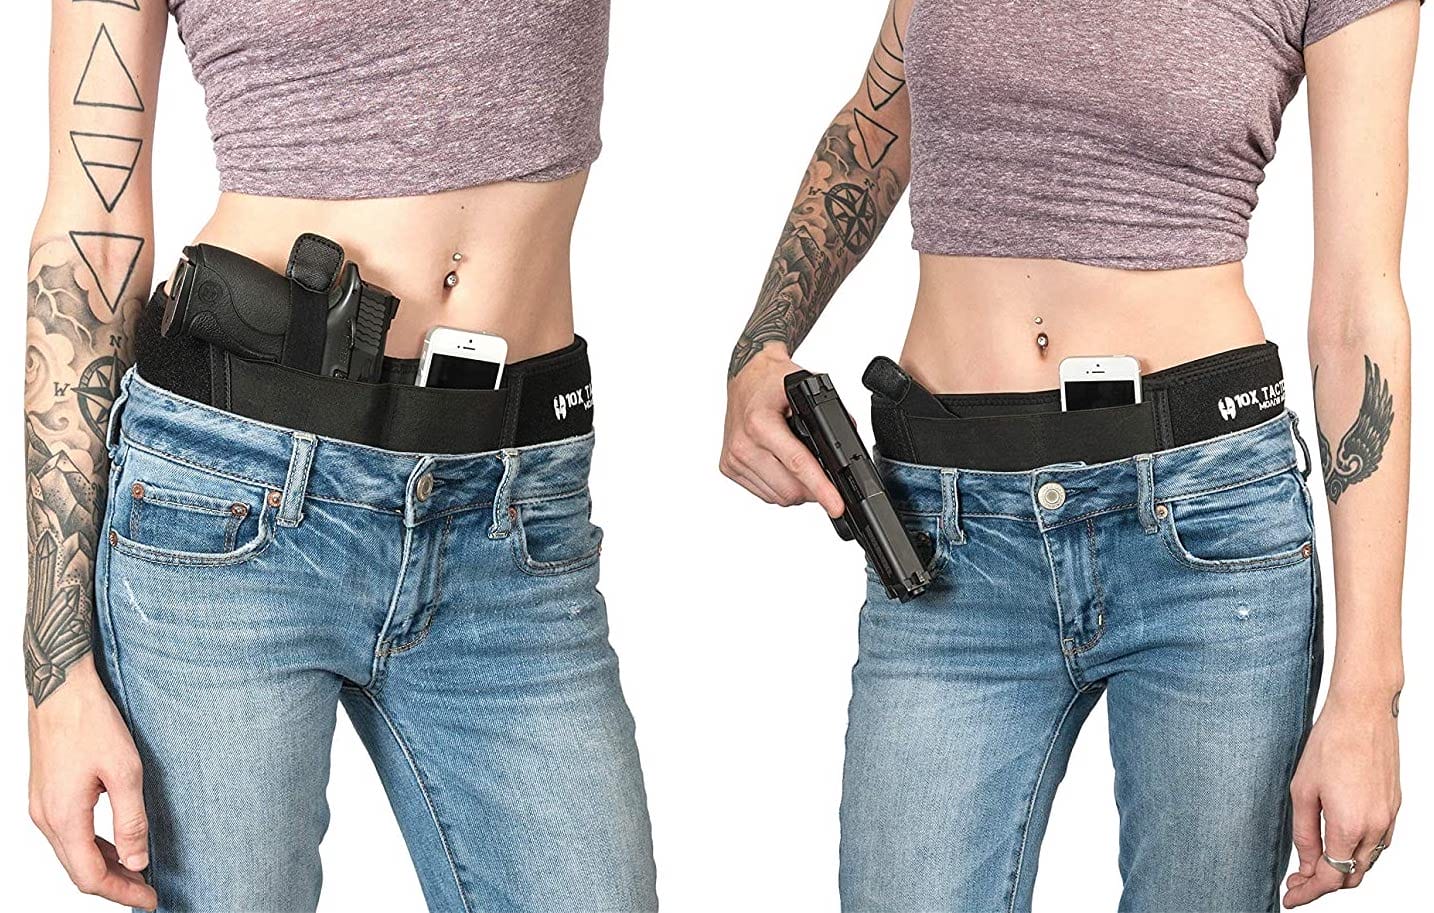 Top 5 Concealed Carry Holsters for Women